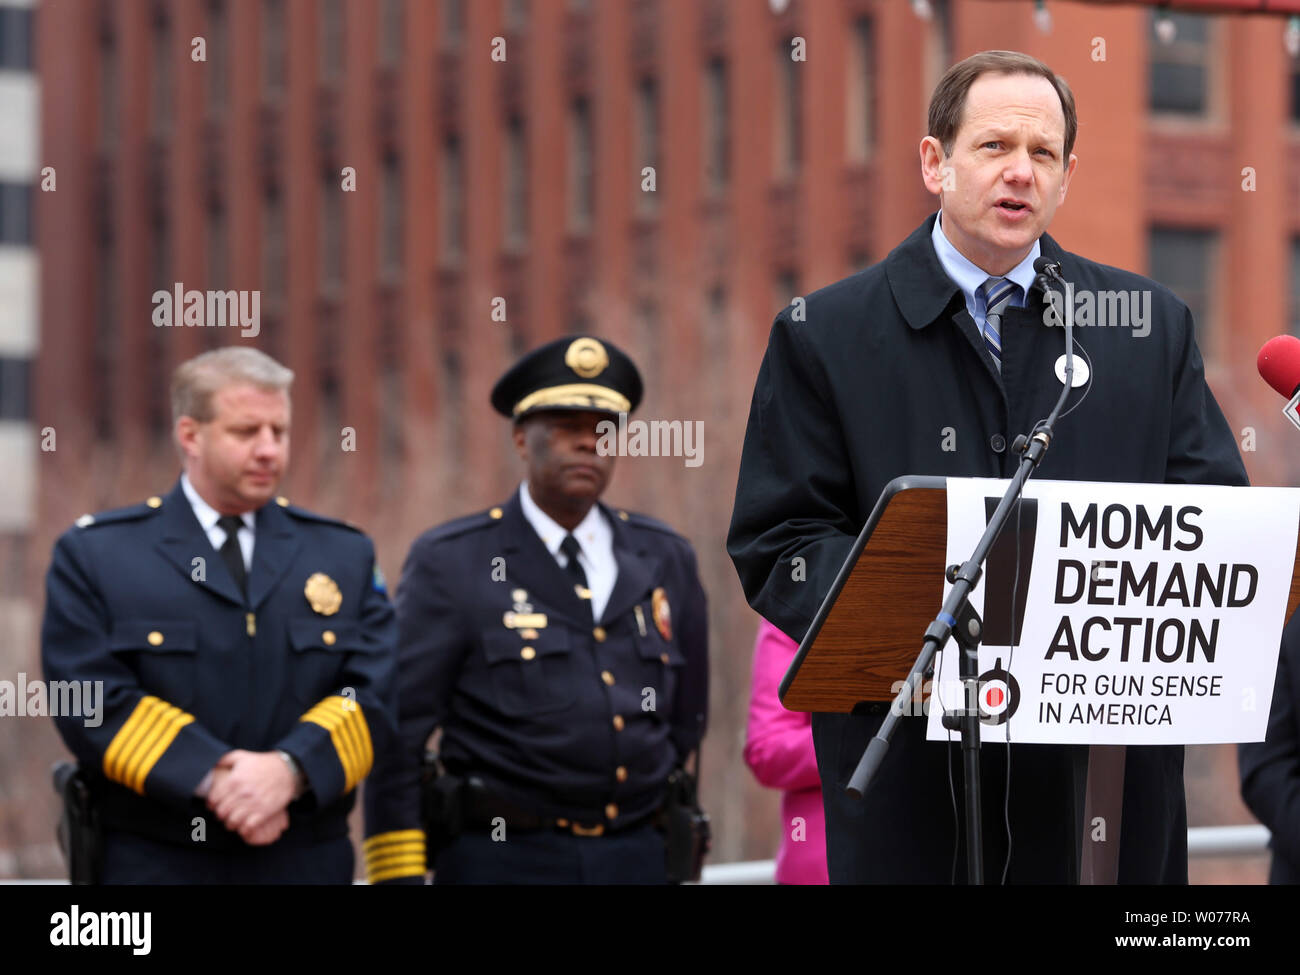 With law enforcement standing near, St. Louis Mayor Francis Slay speaks during a anti gun rally in downtown St. Louis on March 30, 2013. Political and religious leaders plus emergency room doctors spoke about the advantages of backround checks and outlawing large capacity ammunication clips. The rally was organized after a four-year old girl was shot in the shoulder as she stood on her porch in front of her St. Louis home. UPI/Bill Greenblatt Stock Photo